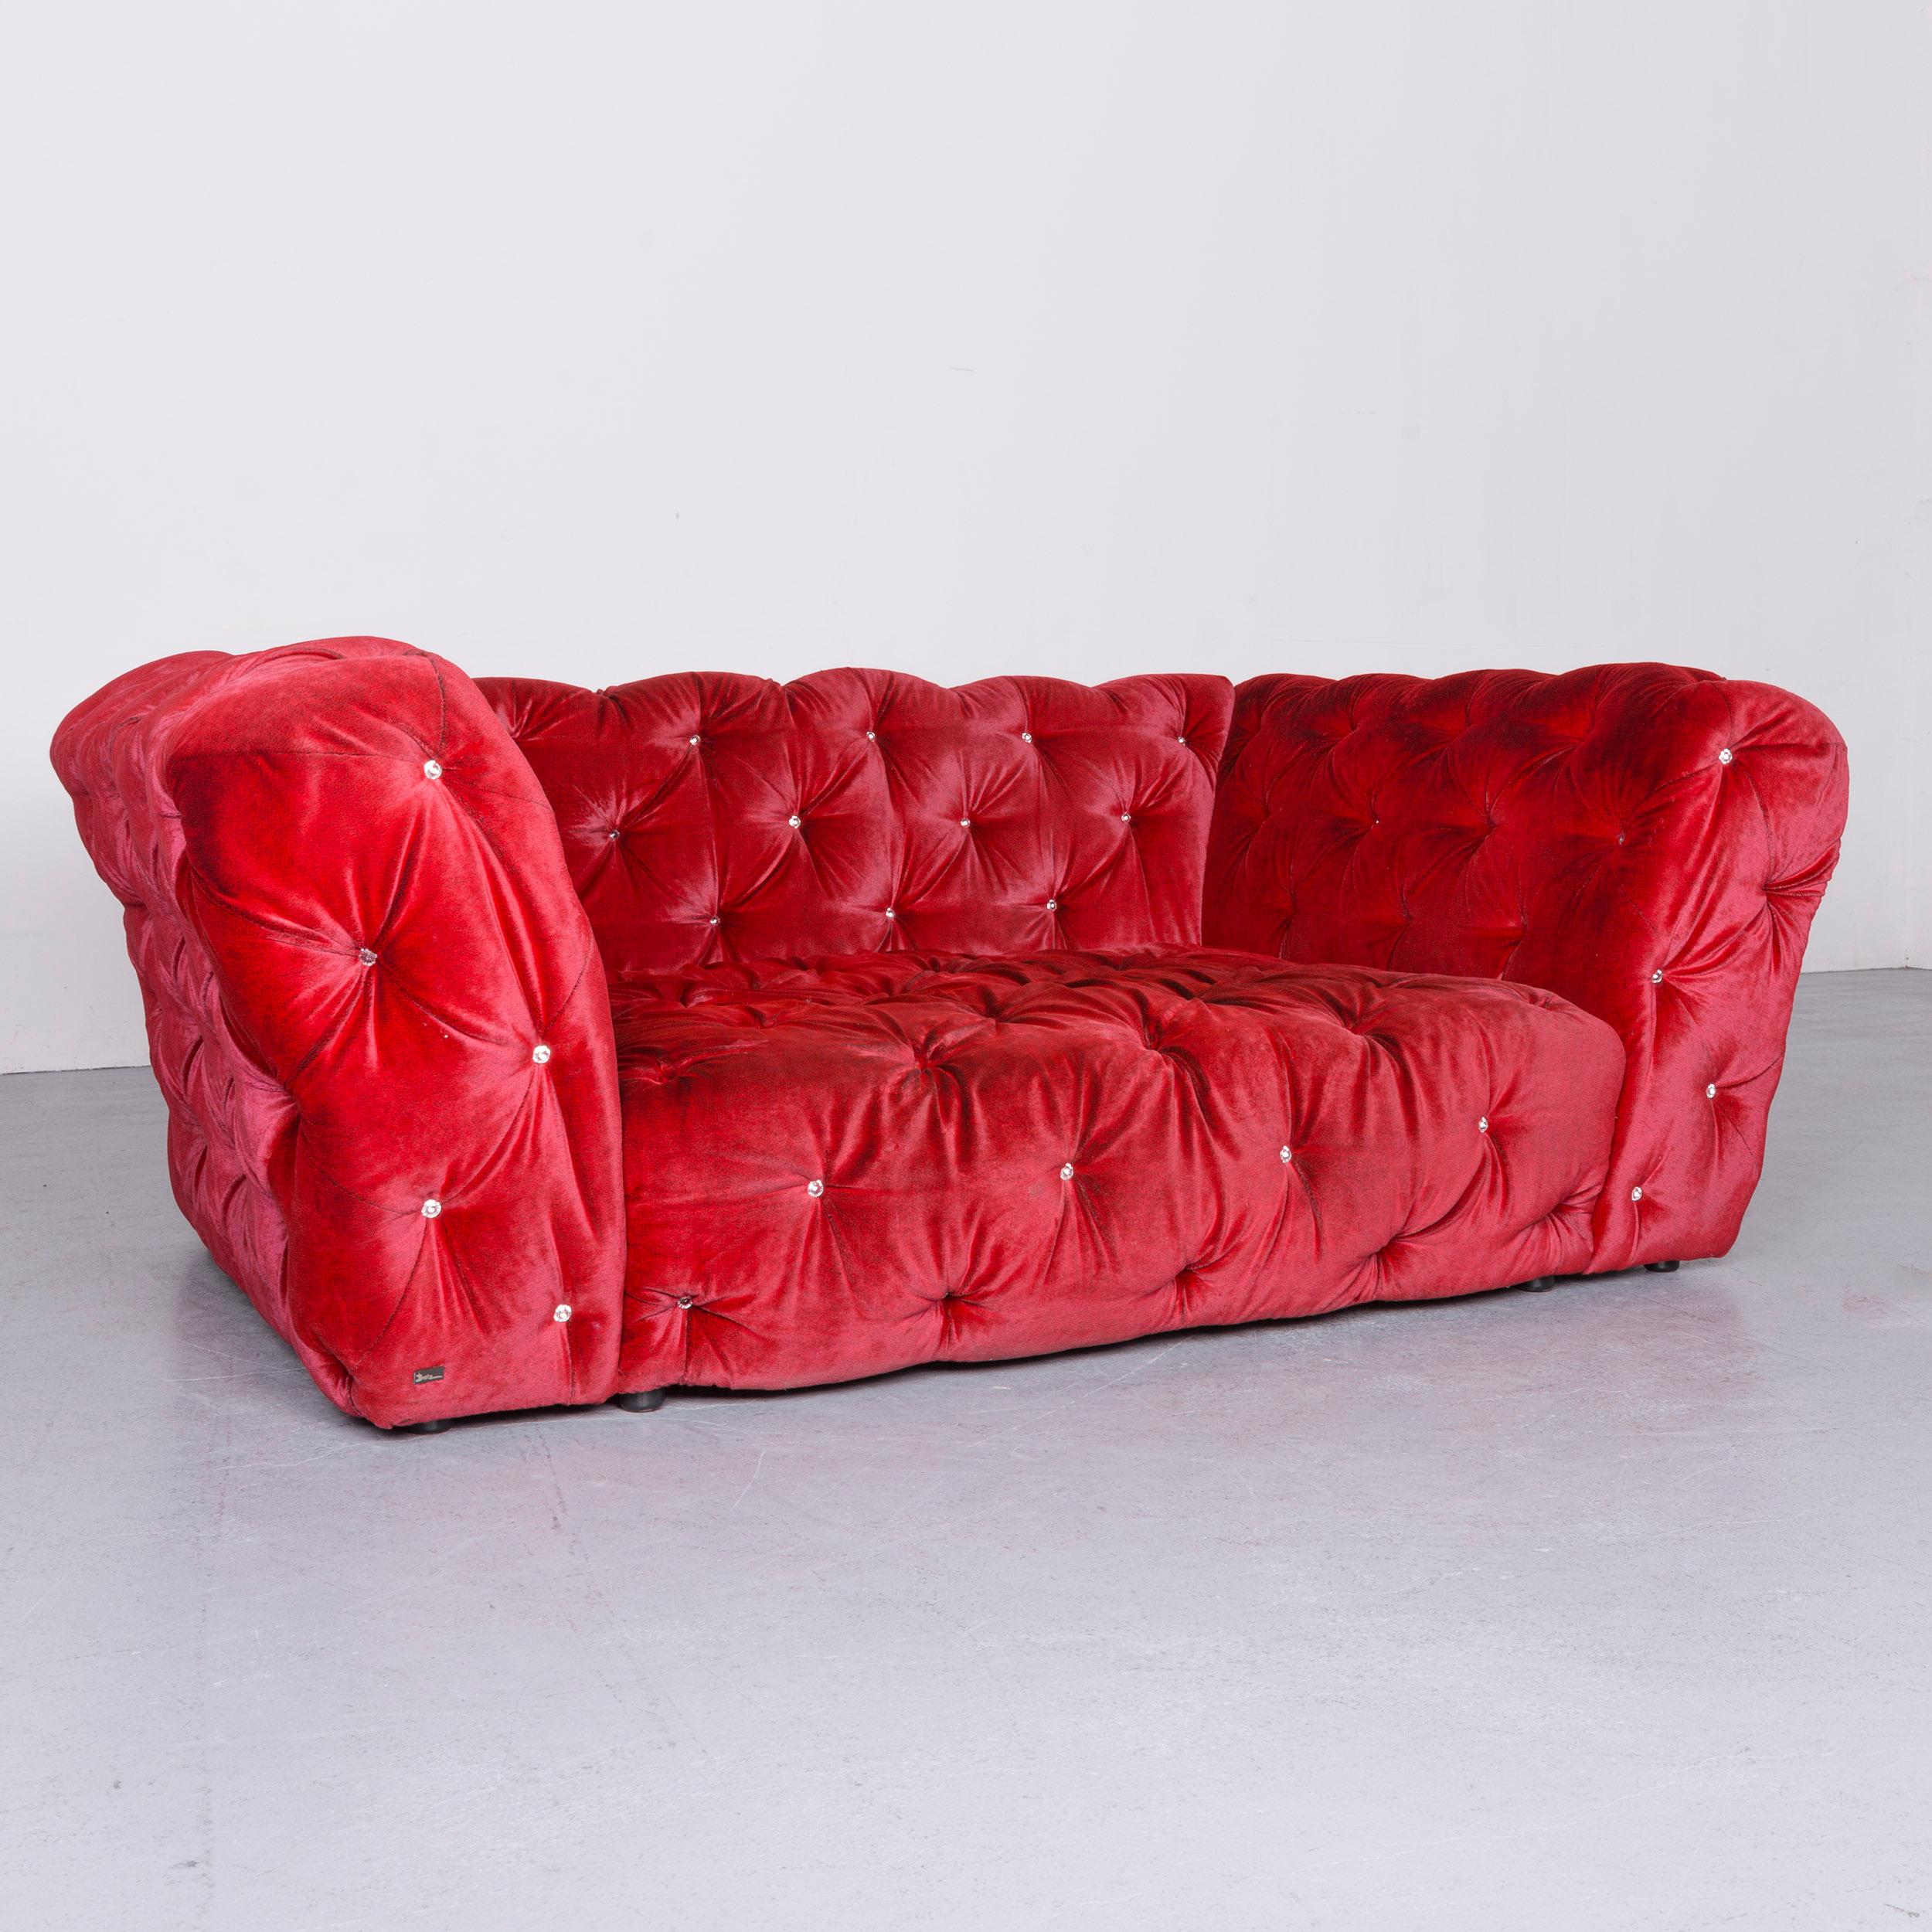 We bring to you a Bretz Marilyn designer fabric three-seat sofa in red.